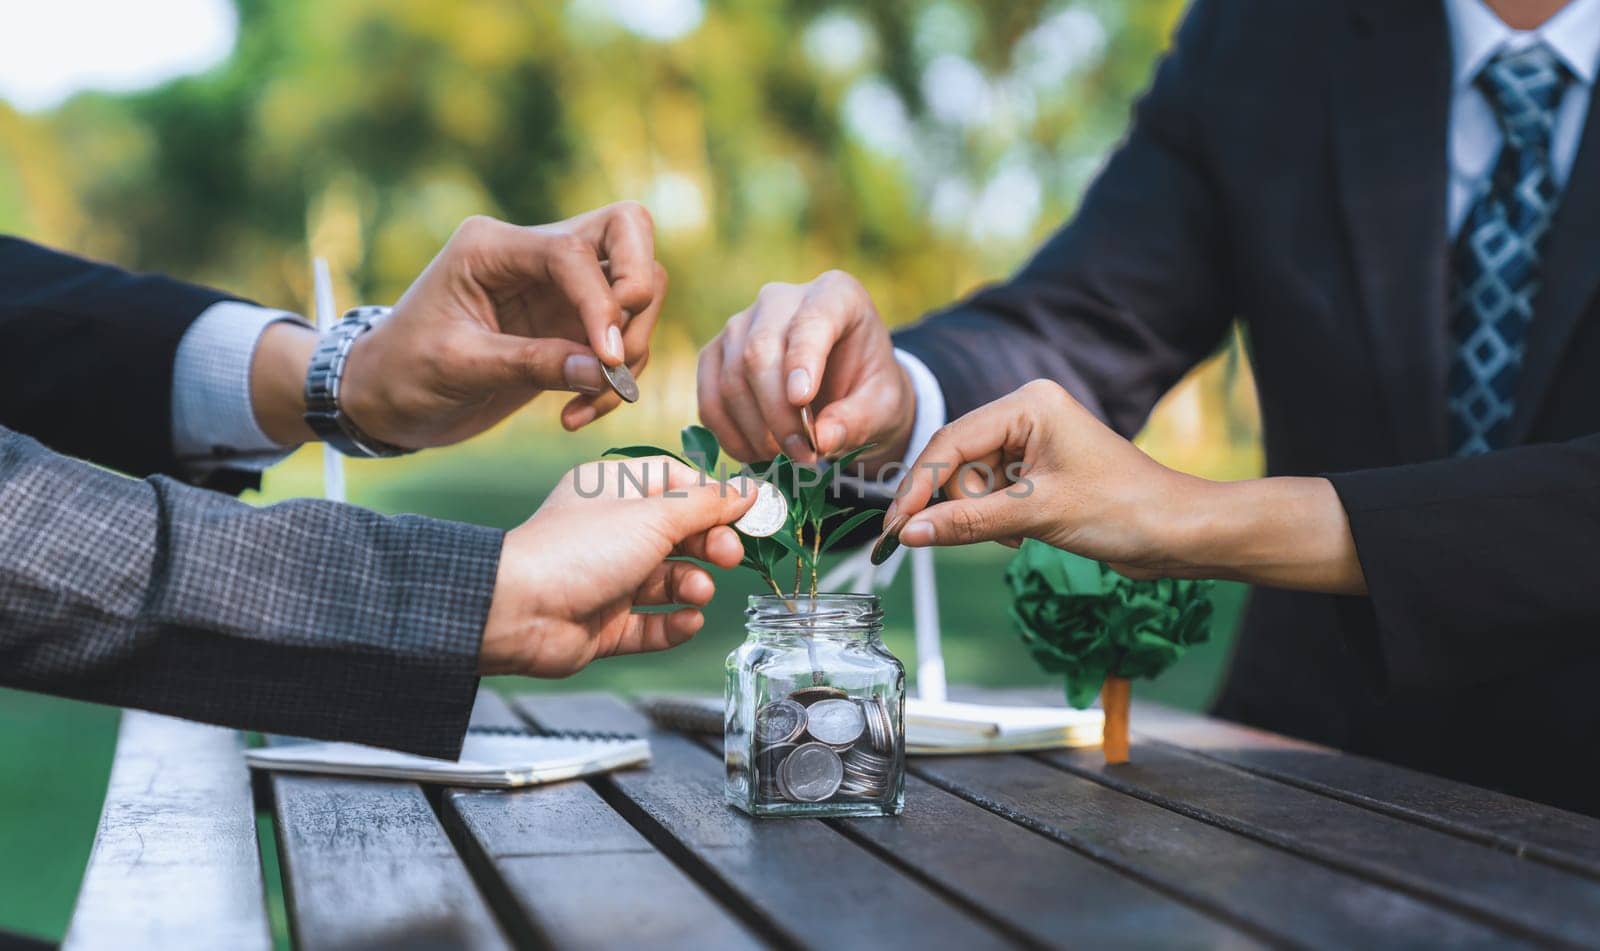 Business people put coin to money saving glass jar on outdoor table as sustainable money growth investment or eco-subsidize. Green corporate promot and invest in environmental awareness. Gyre